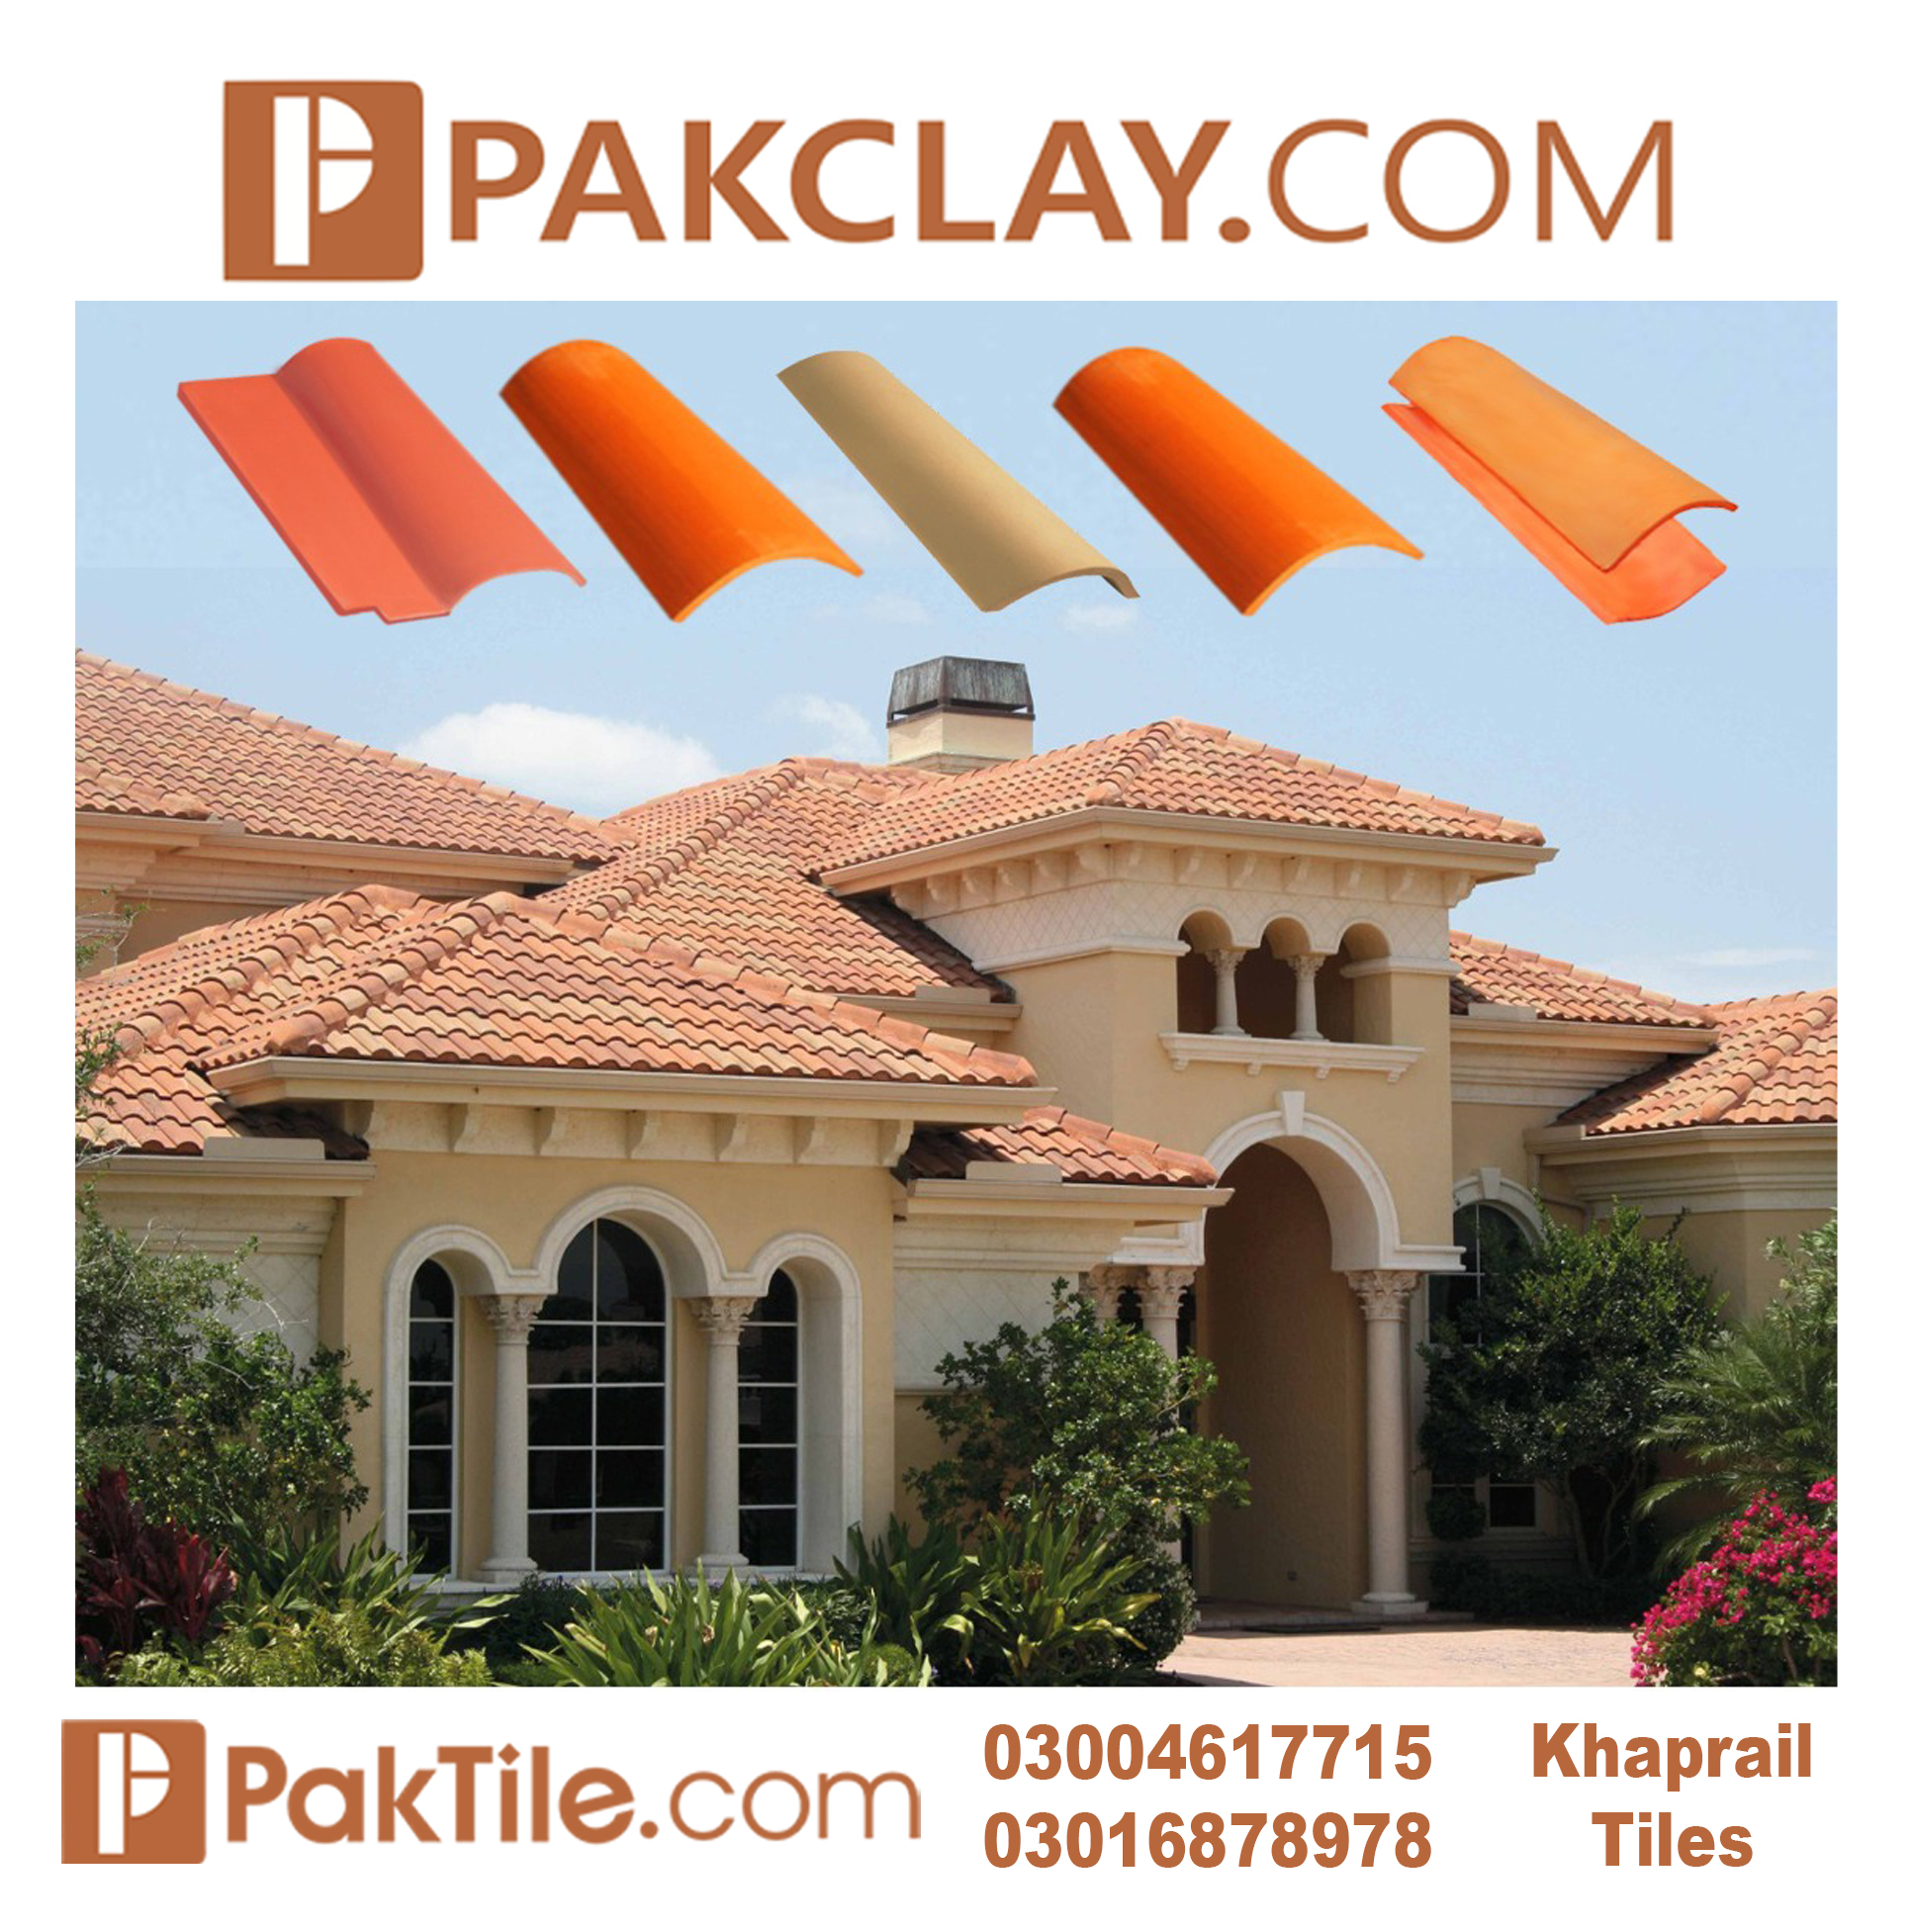 Natural Khaprail Tiles in Islamabad